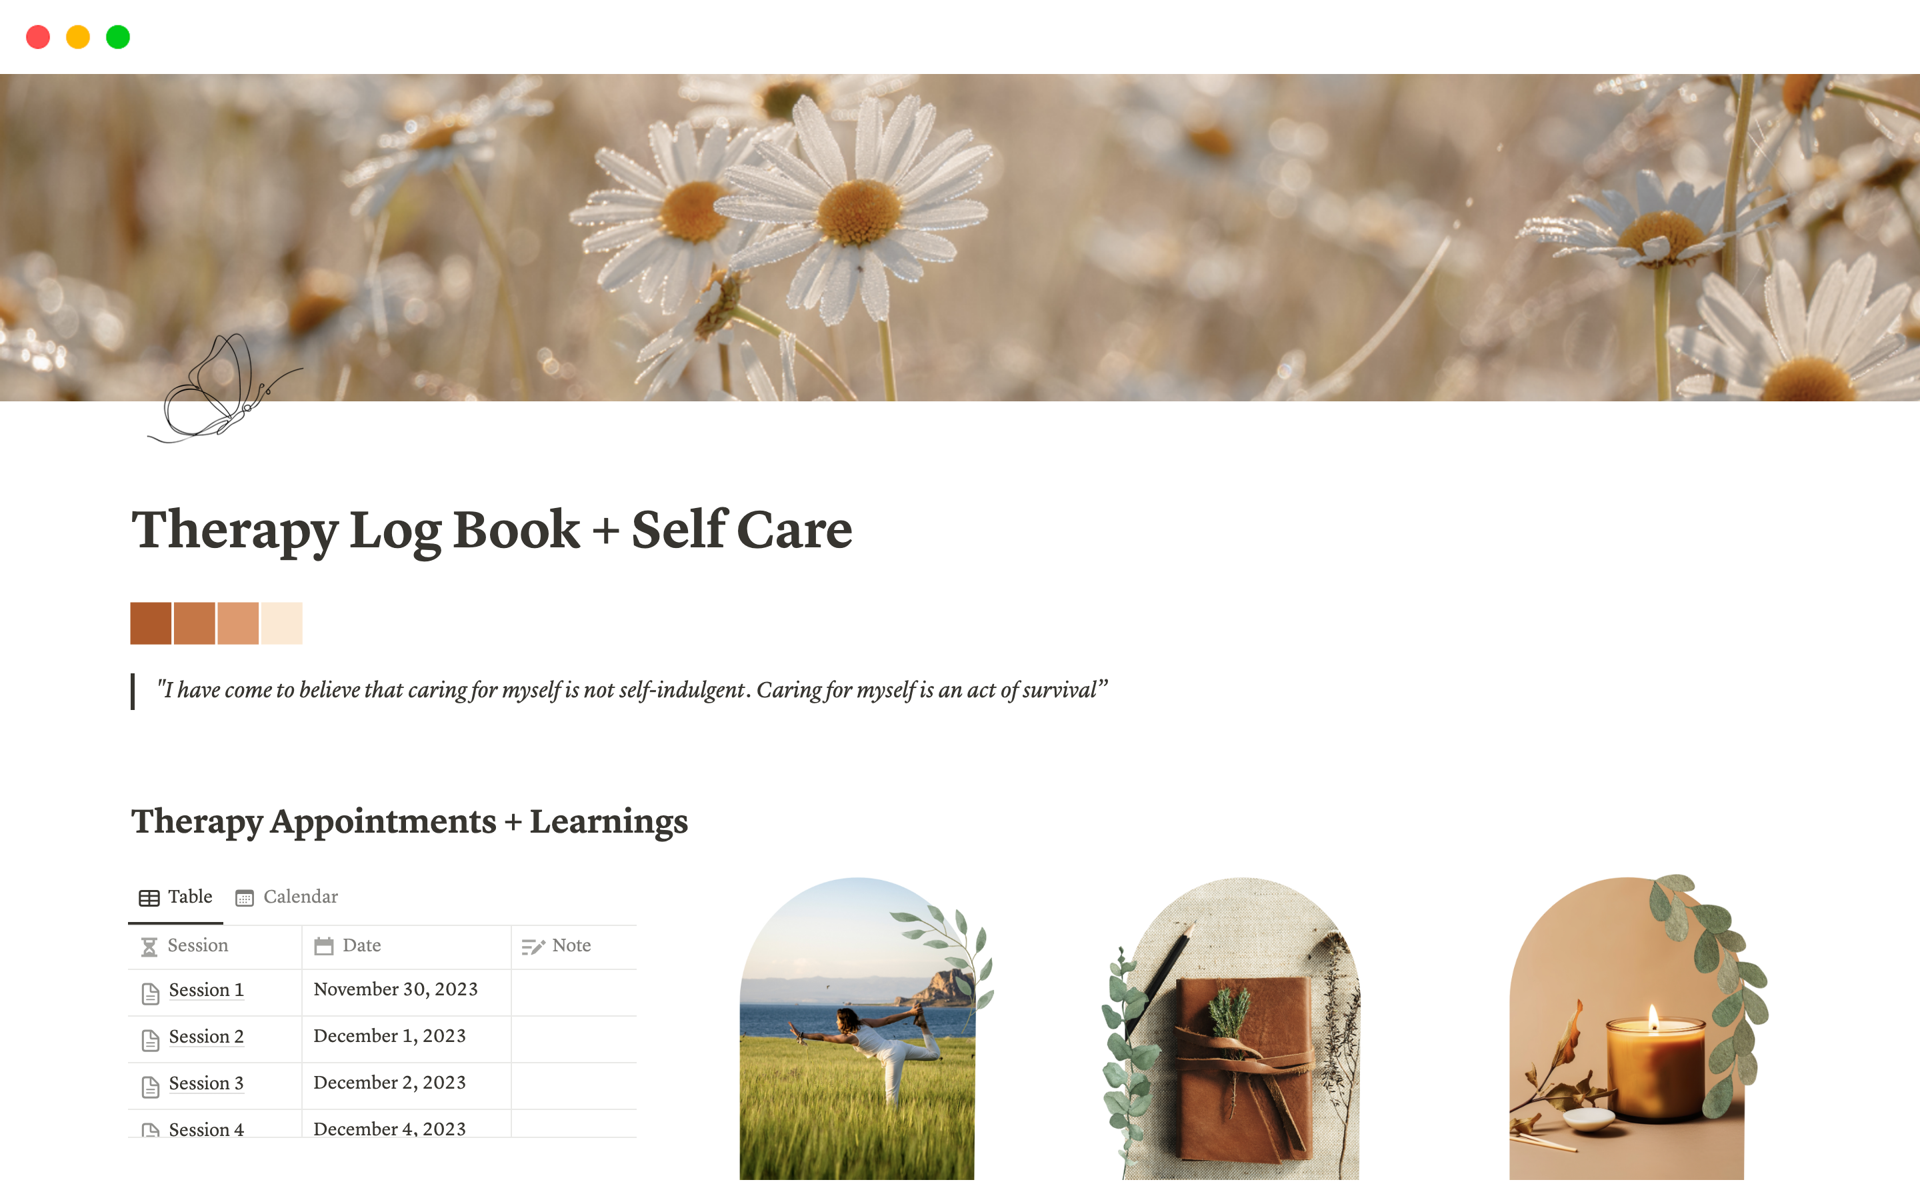 Features: Therapy Appointments + Learnings | Mood Tracker | Medication Tracker | Personal Care Goals: Physical, Mental, Skin, Relationships, Dopamine, Gut | Self Care Questionnaire | Vent Corner